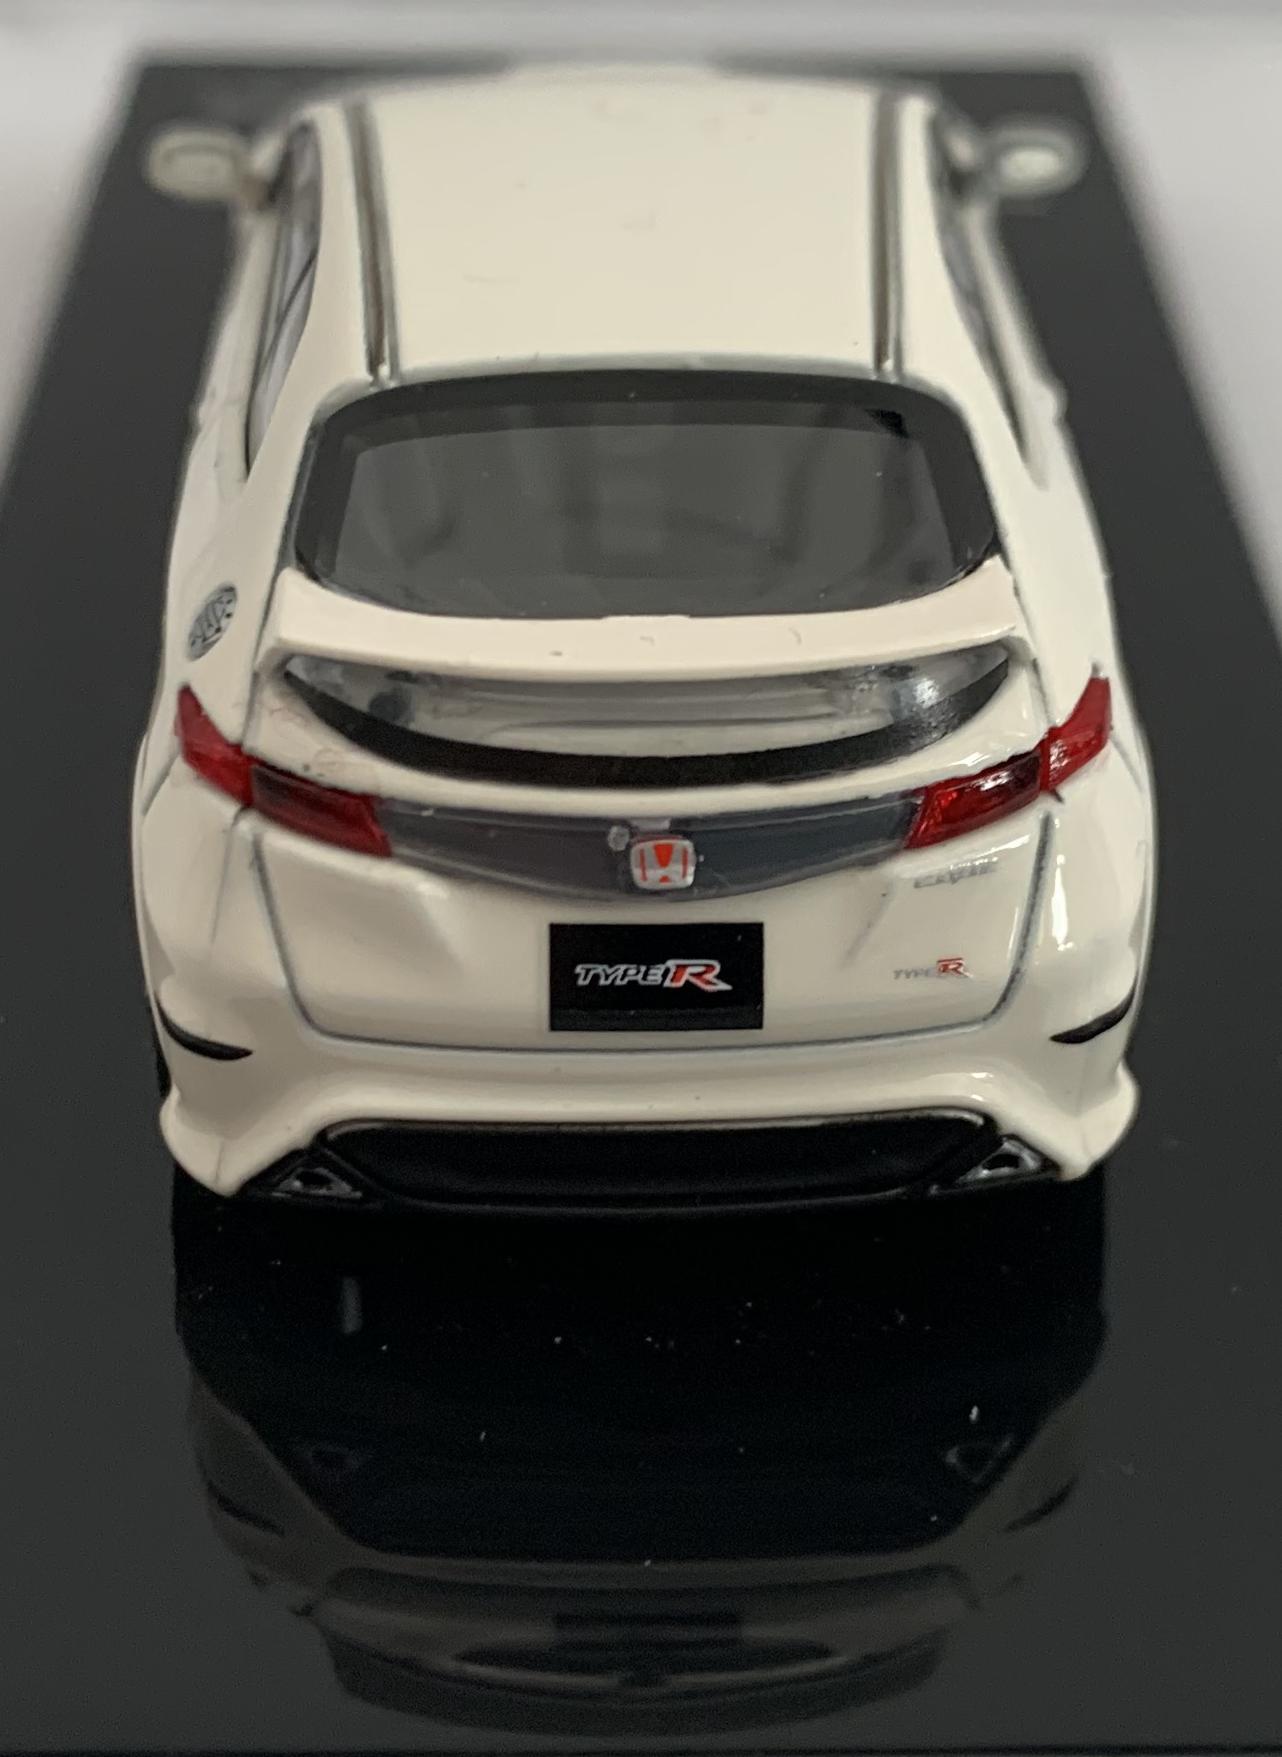 Honda Civic Type R in championship white 1:64 scale model from Paragon Models